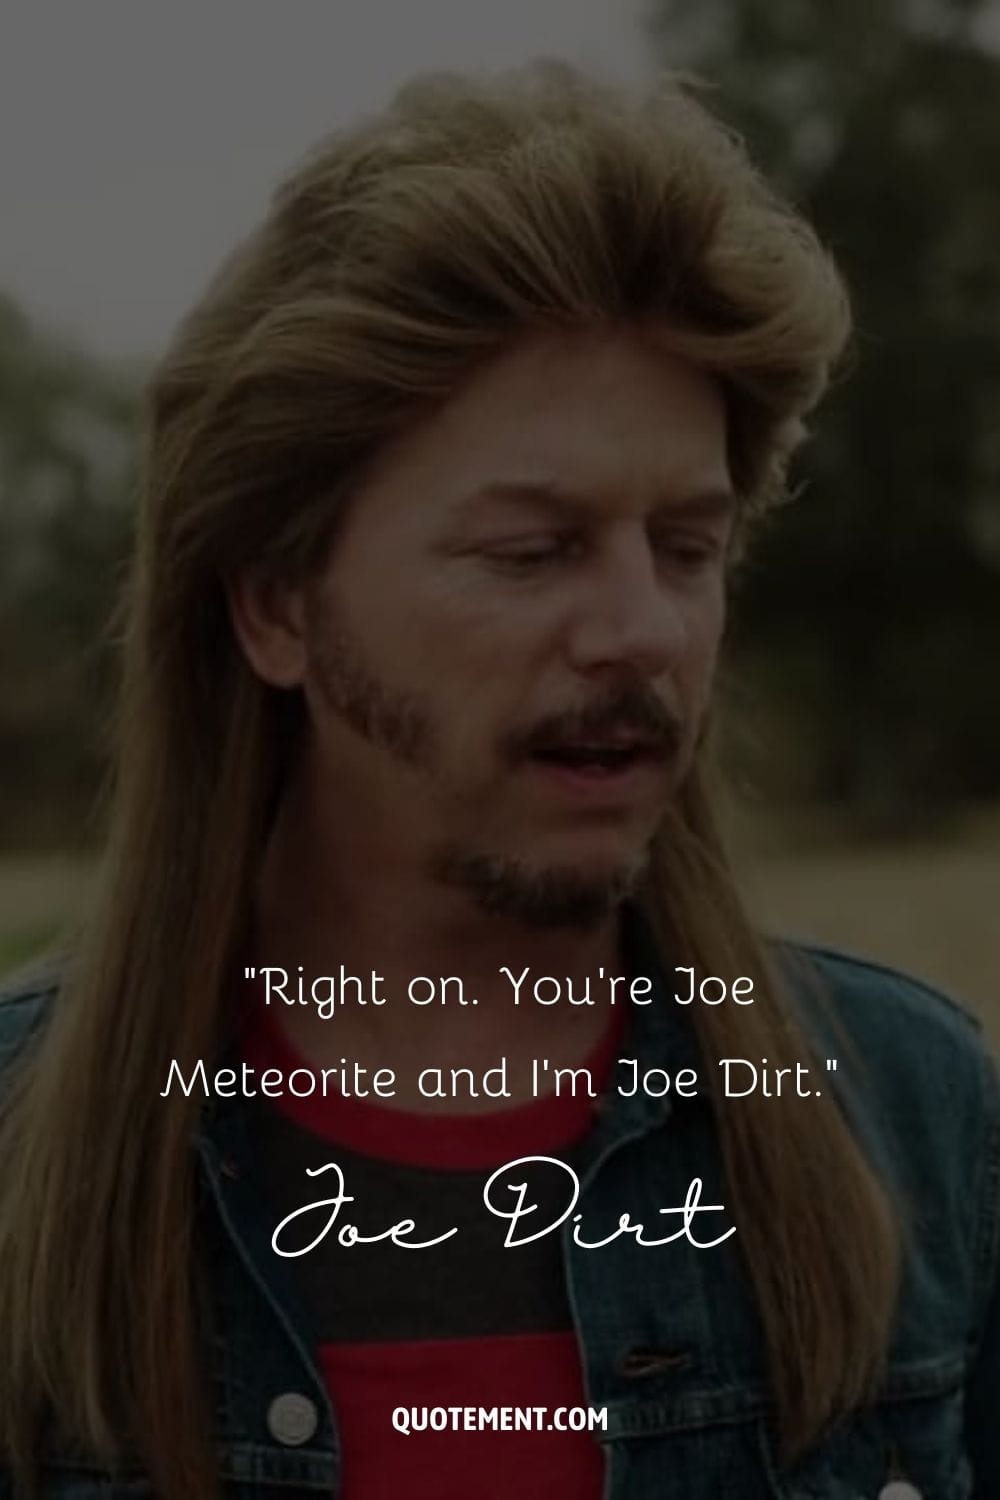 Joe Dirt's classic mullet and funny grin.